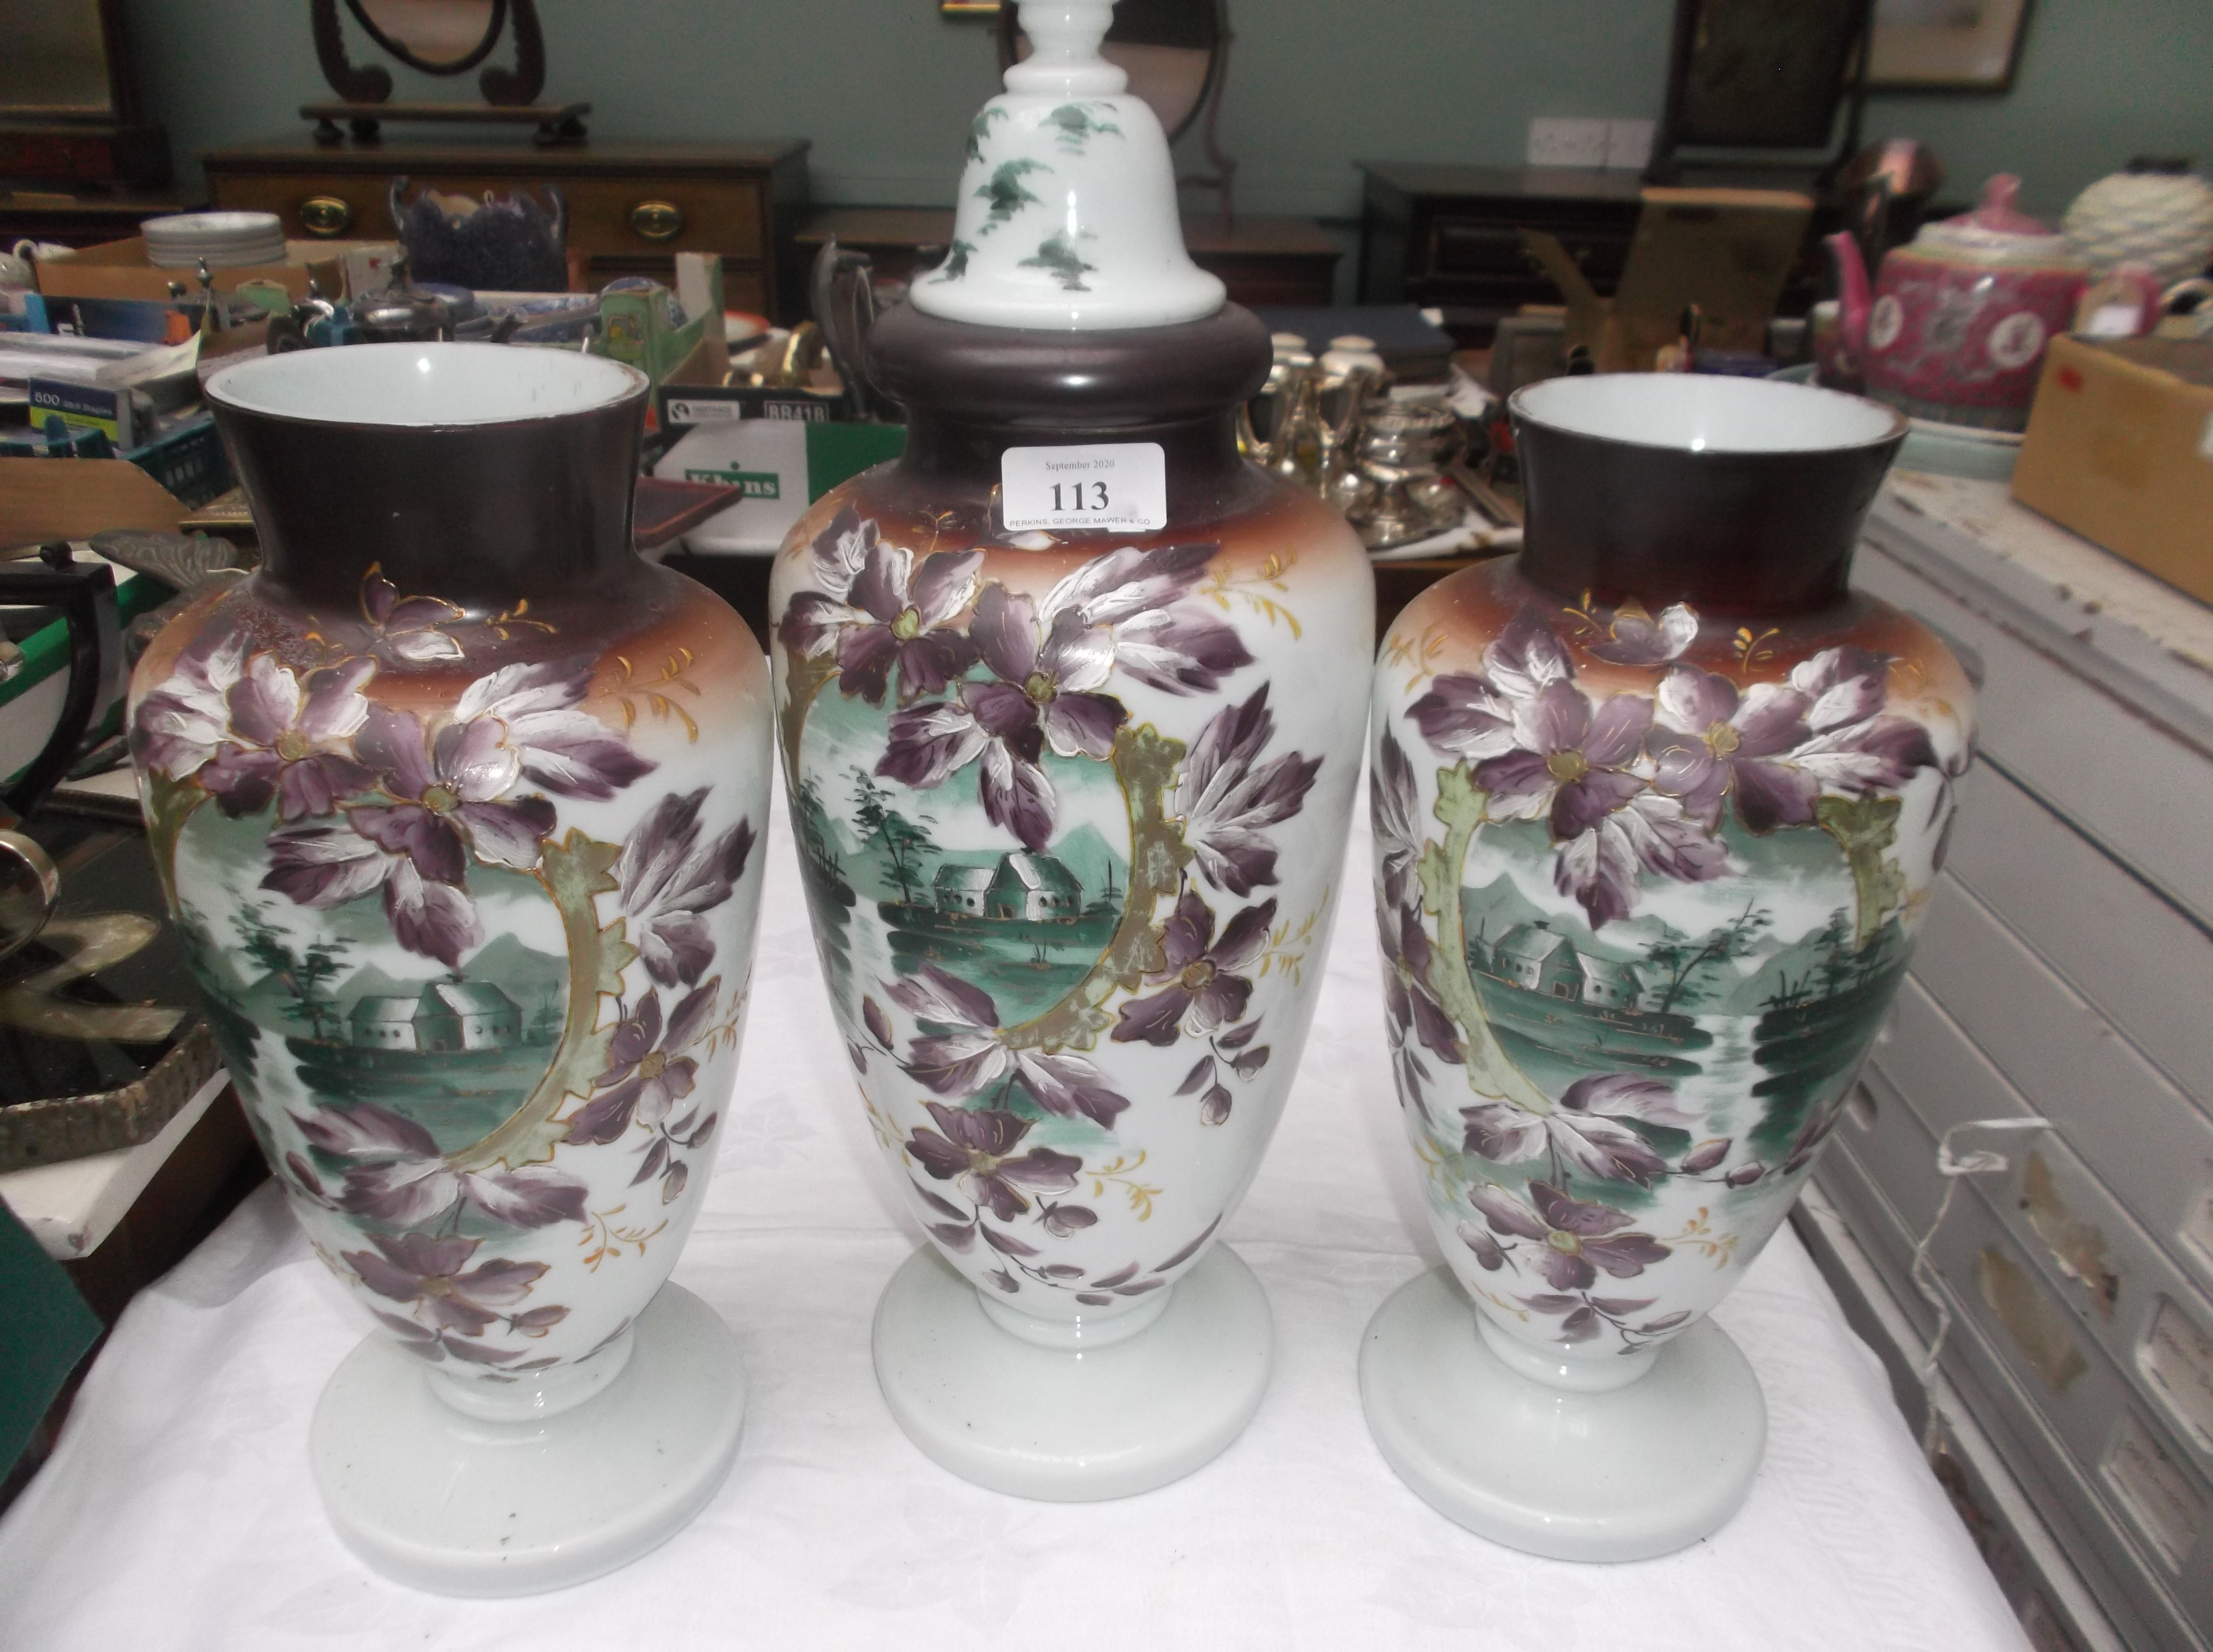 3 piece clouded glass mantelpiece set of 3 urn shaped vases,